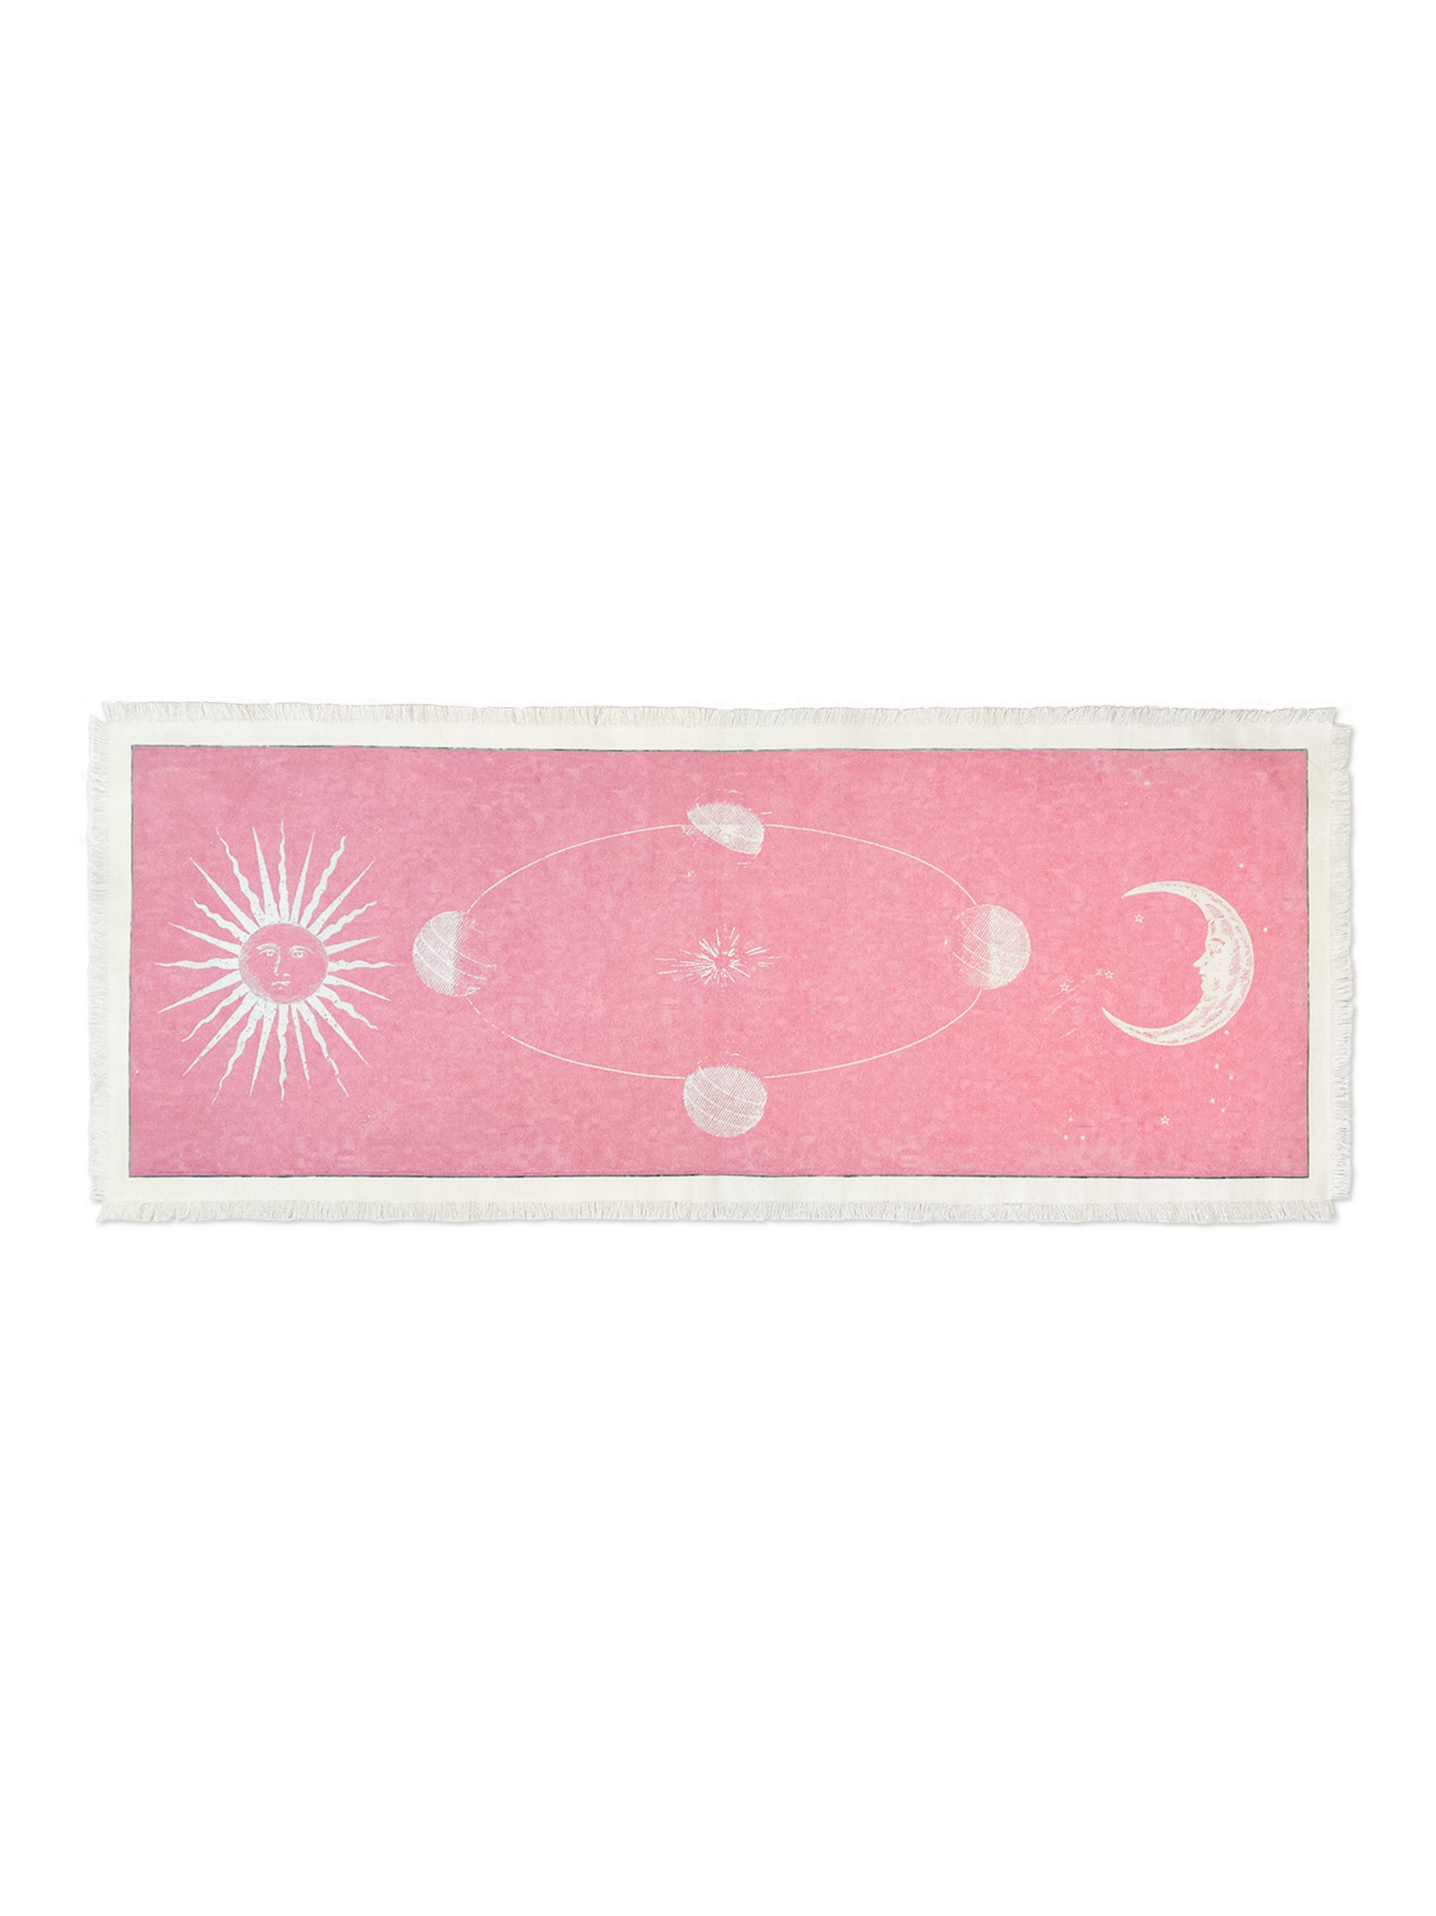 Red Ver) Moon Staring at the Sun Fabric Poster